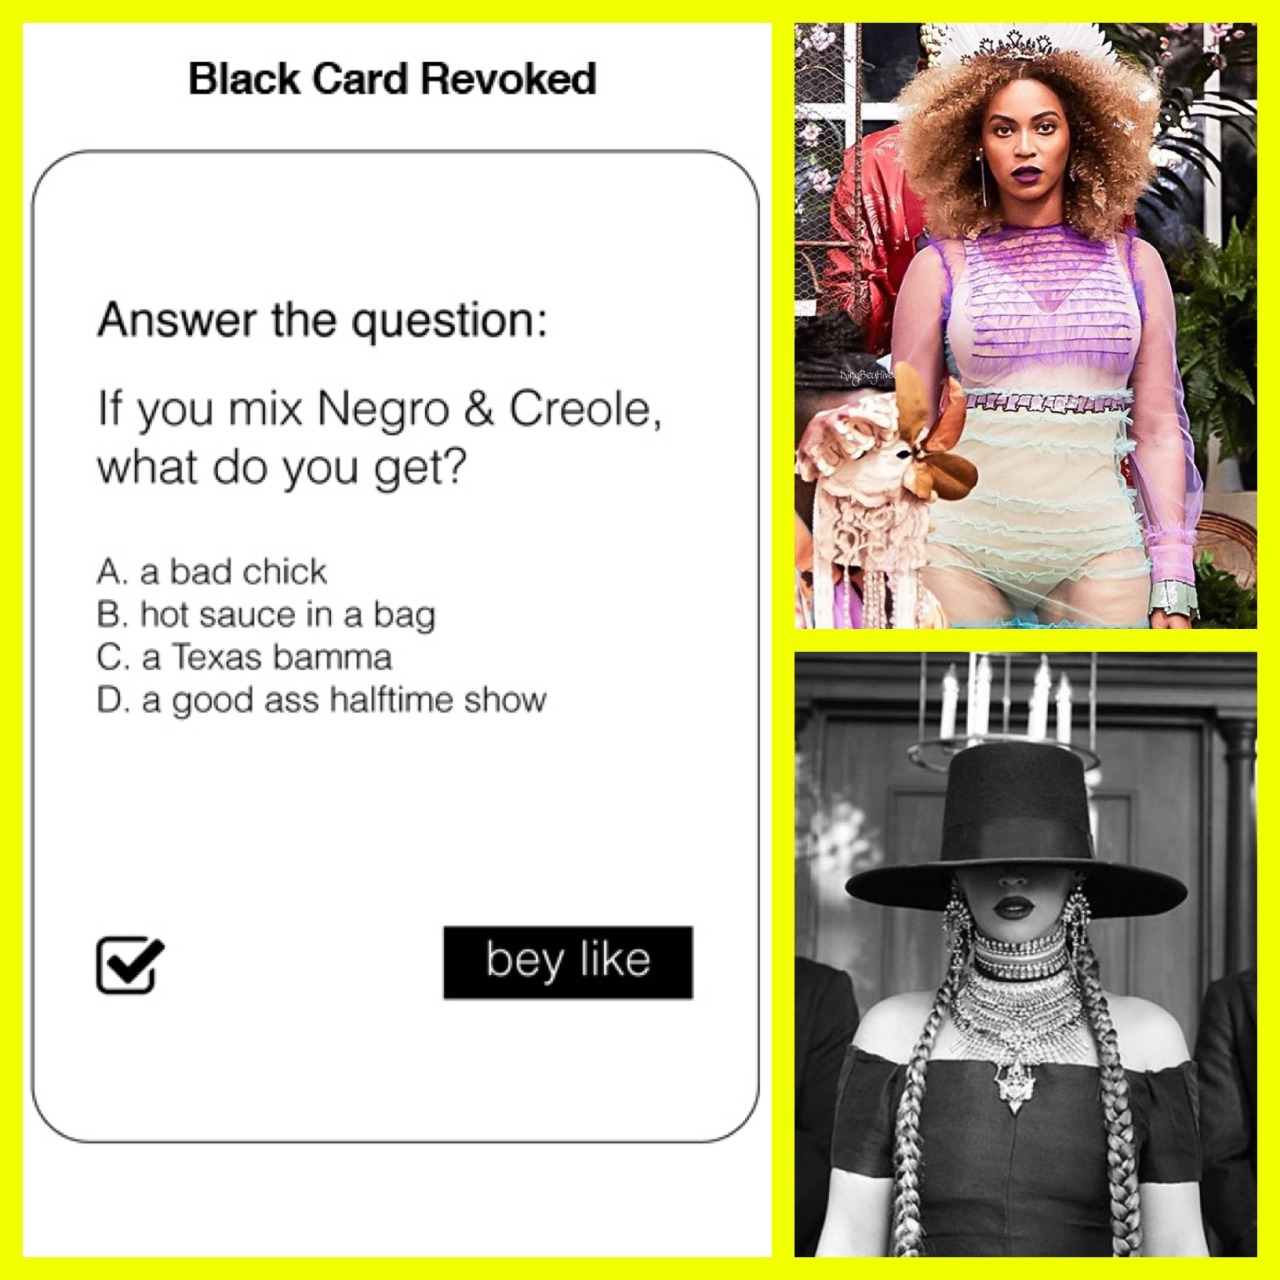 Black Card Revoked Questions And Answers Pdf Black Card Revoked